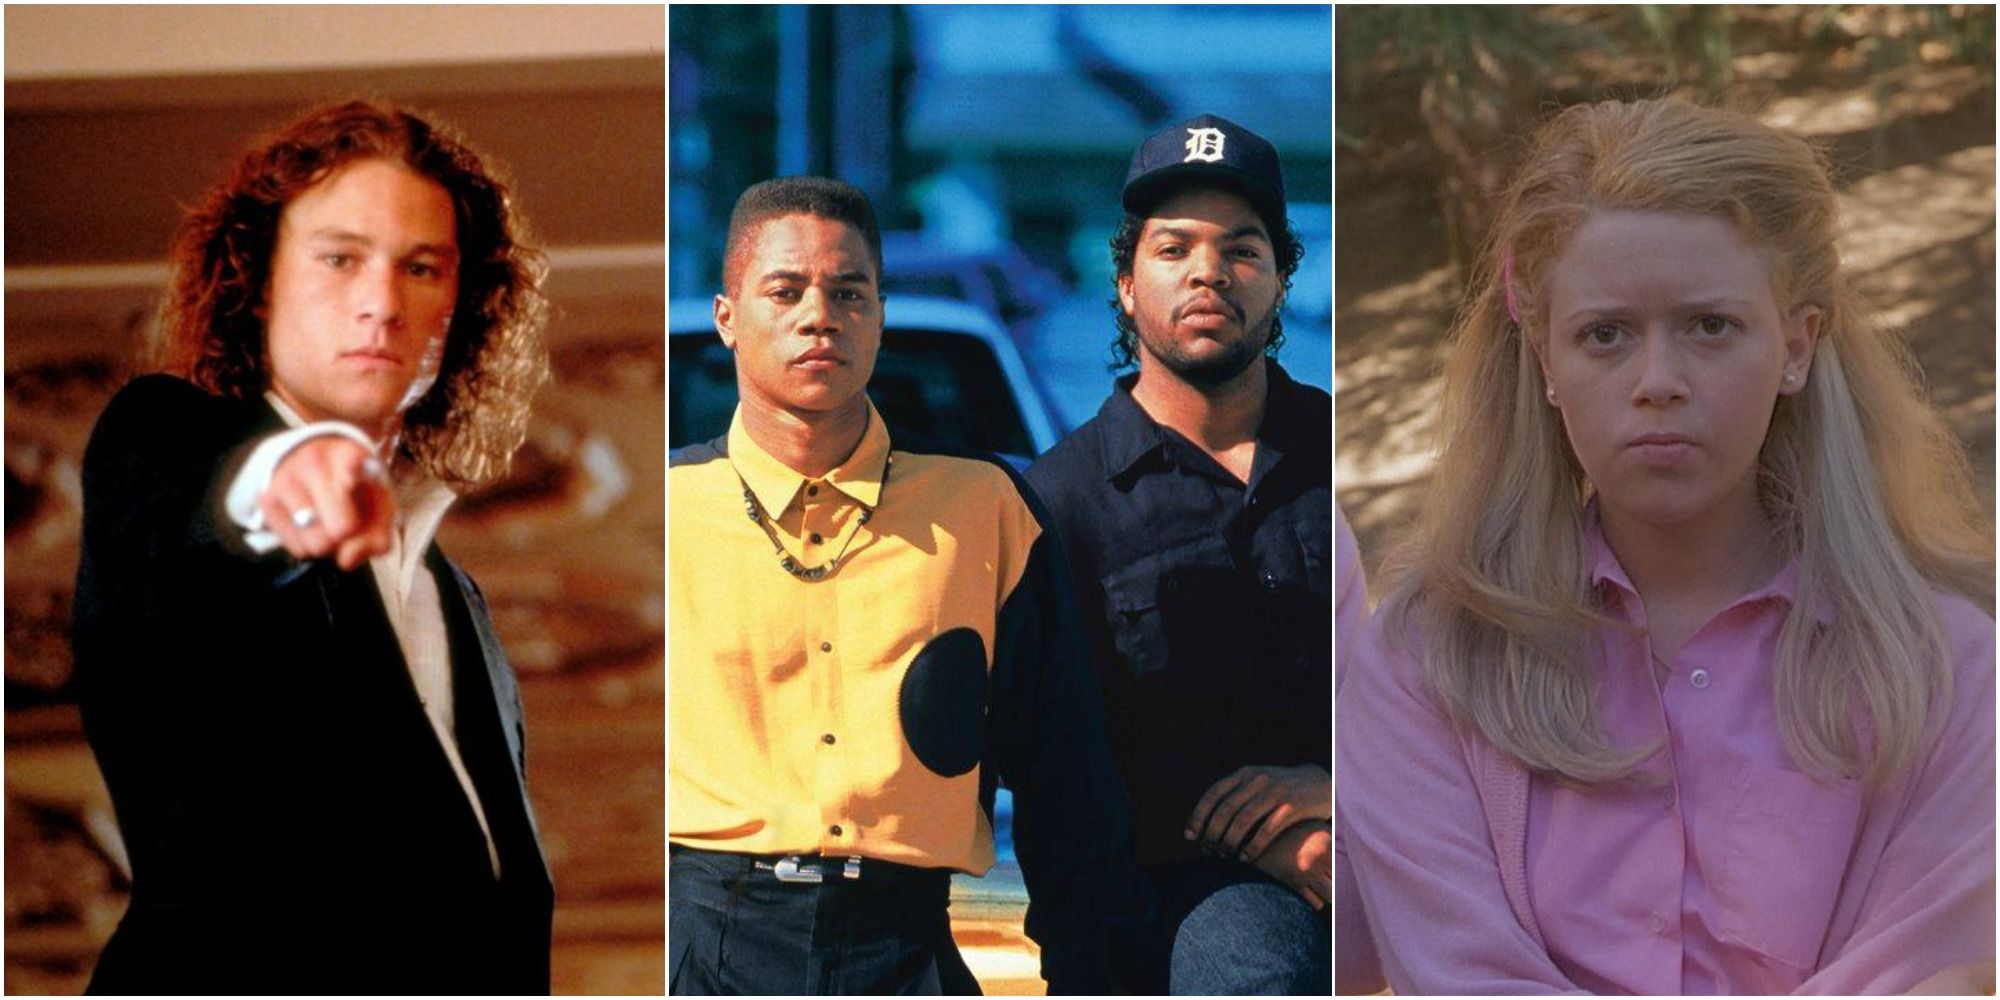 The 10 Best Coming-of-Age Movies of the 90s, According to Letterboxd